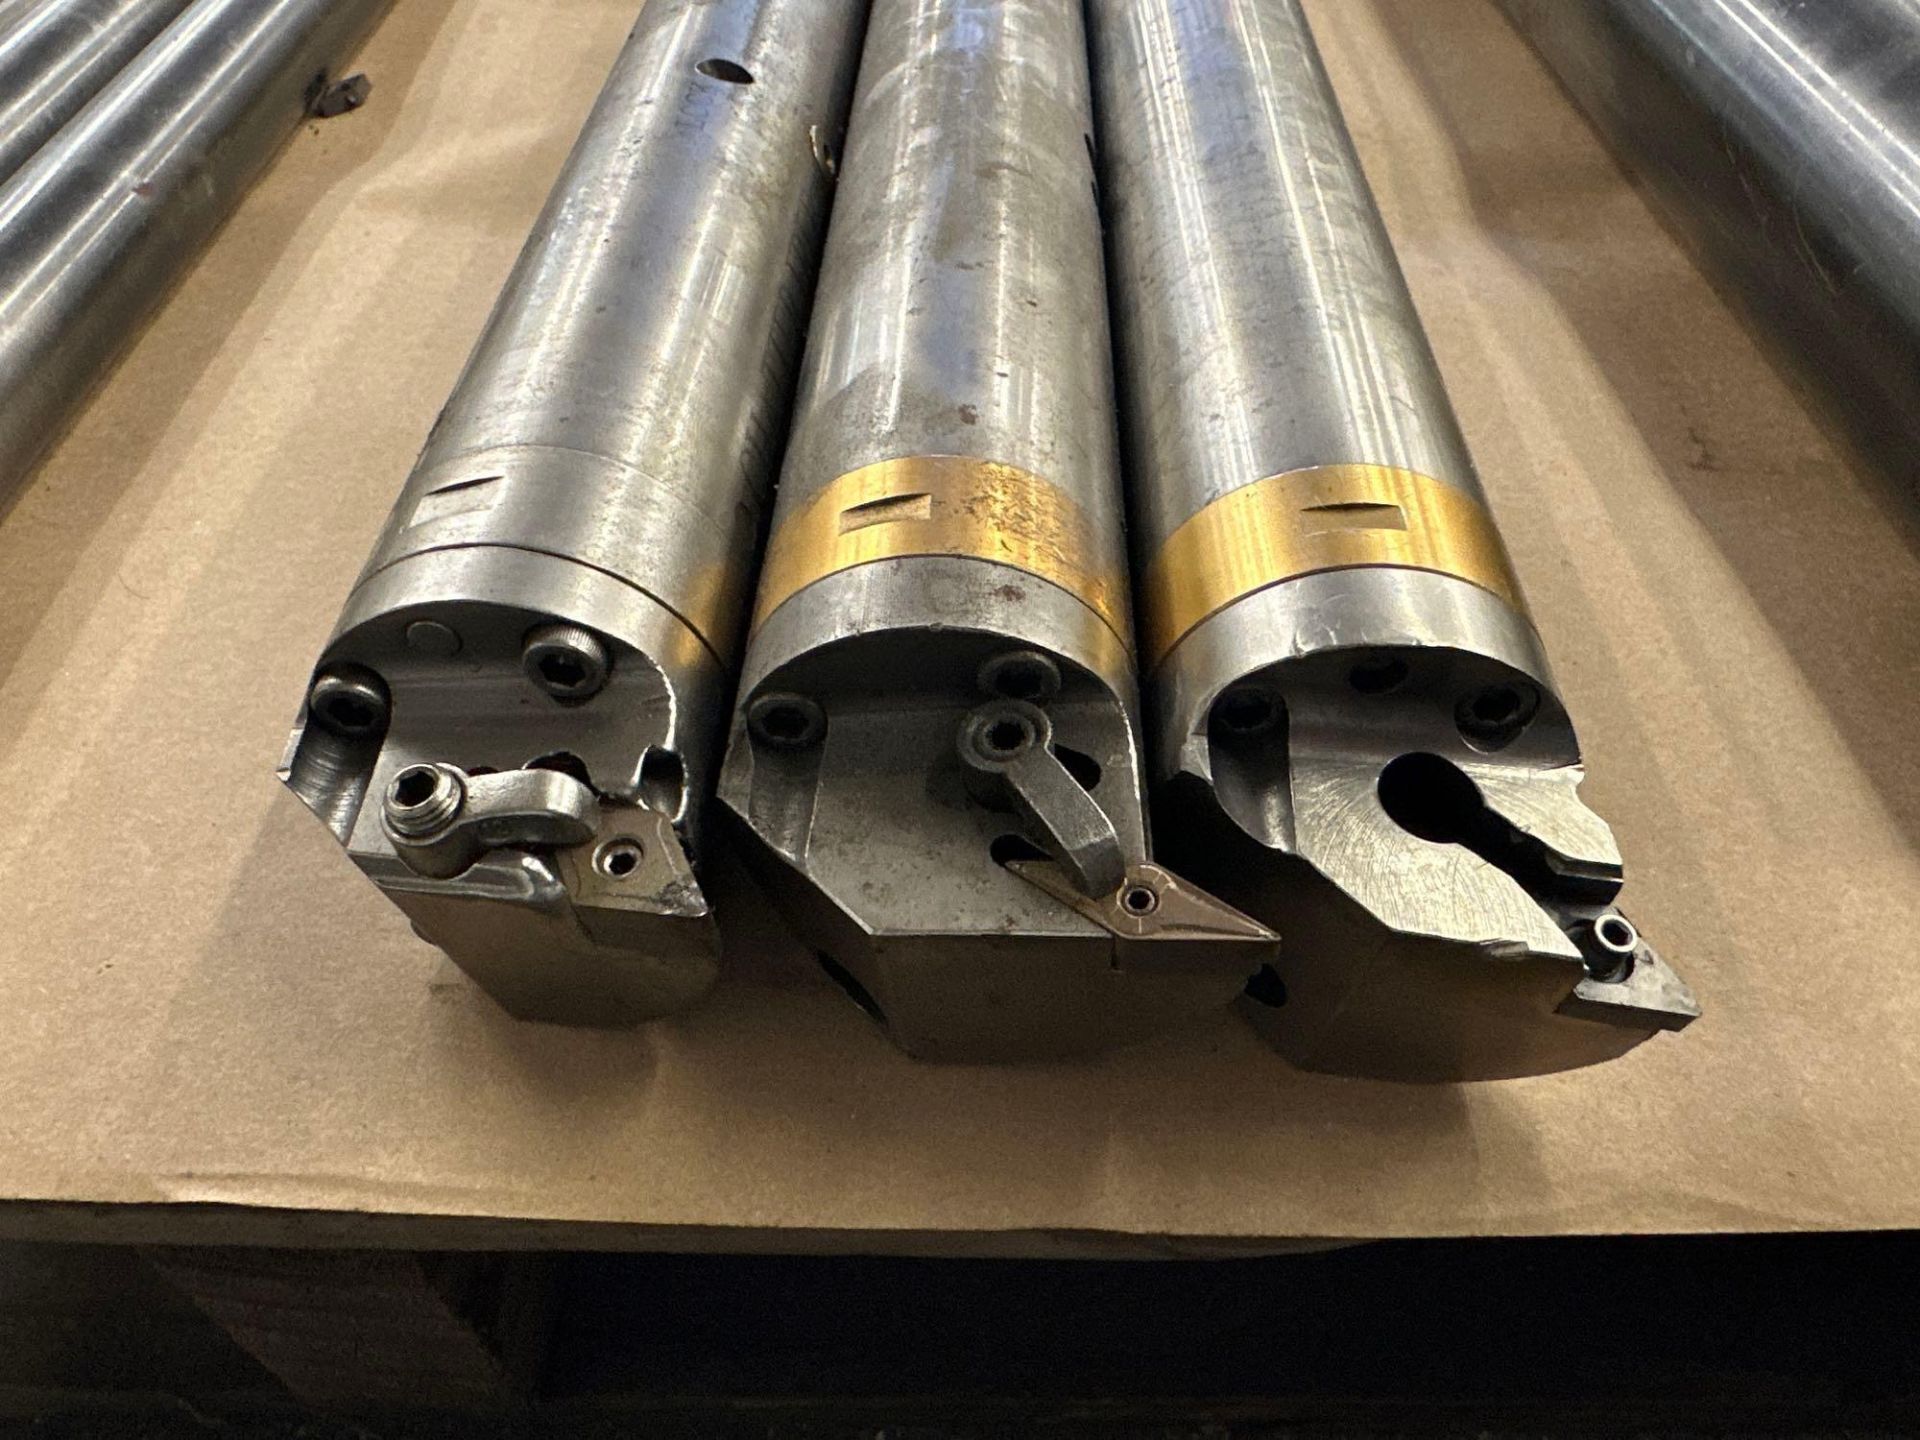 Lot of 3 Ultra Dex Boring Bars with Heads on: (2) CFT B2000 20, 1 7/8” X 19 1/2” (1) CFT B2000 18, 1 - Image 4 of 5